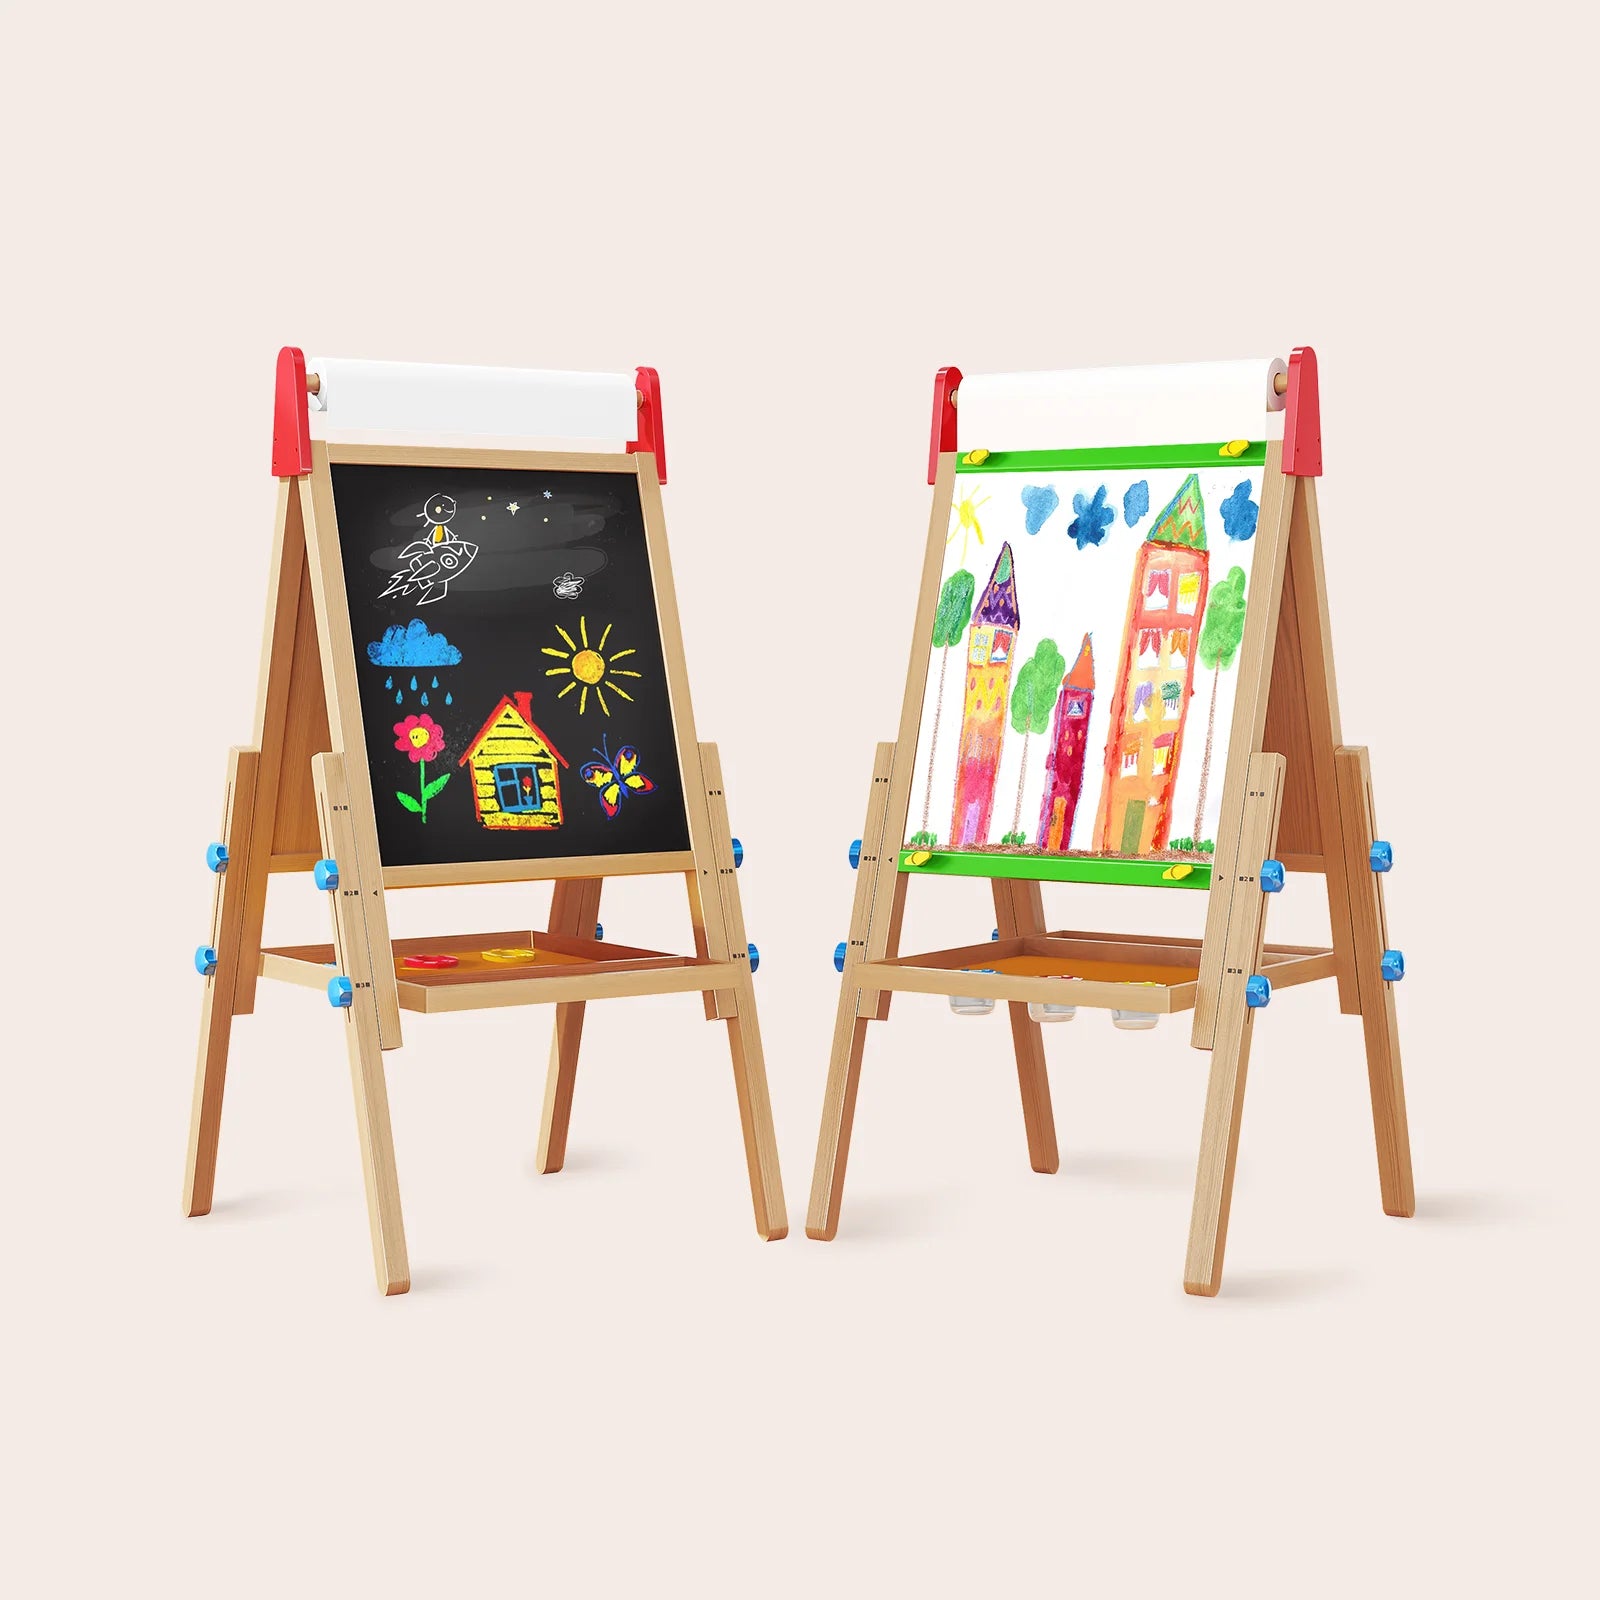 Getting the best from your art easel